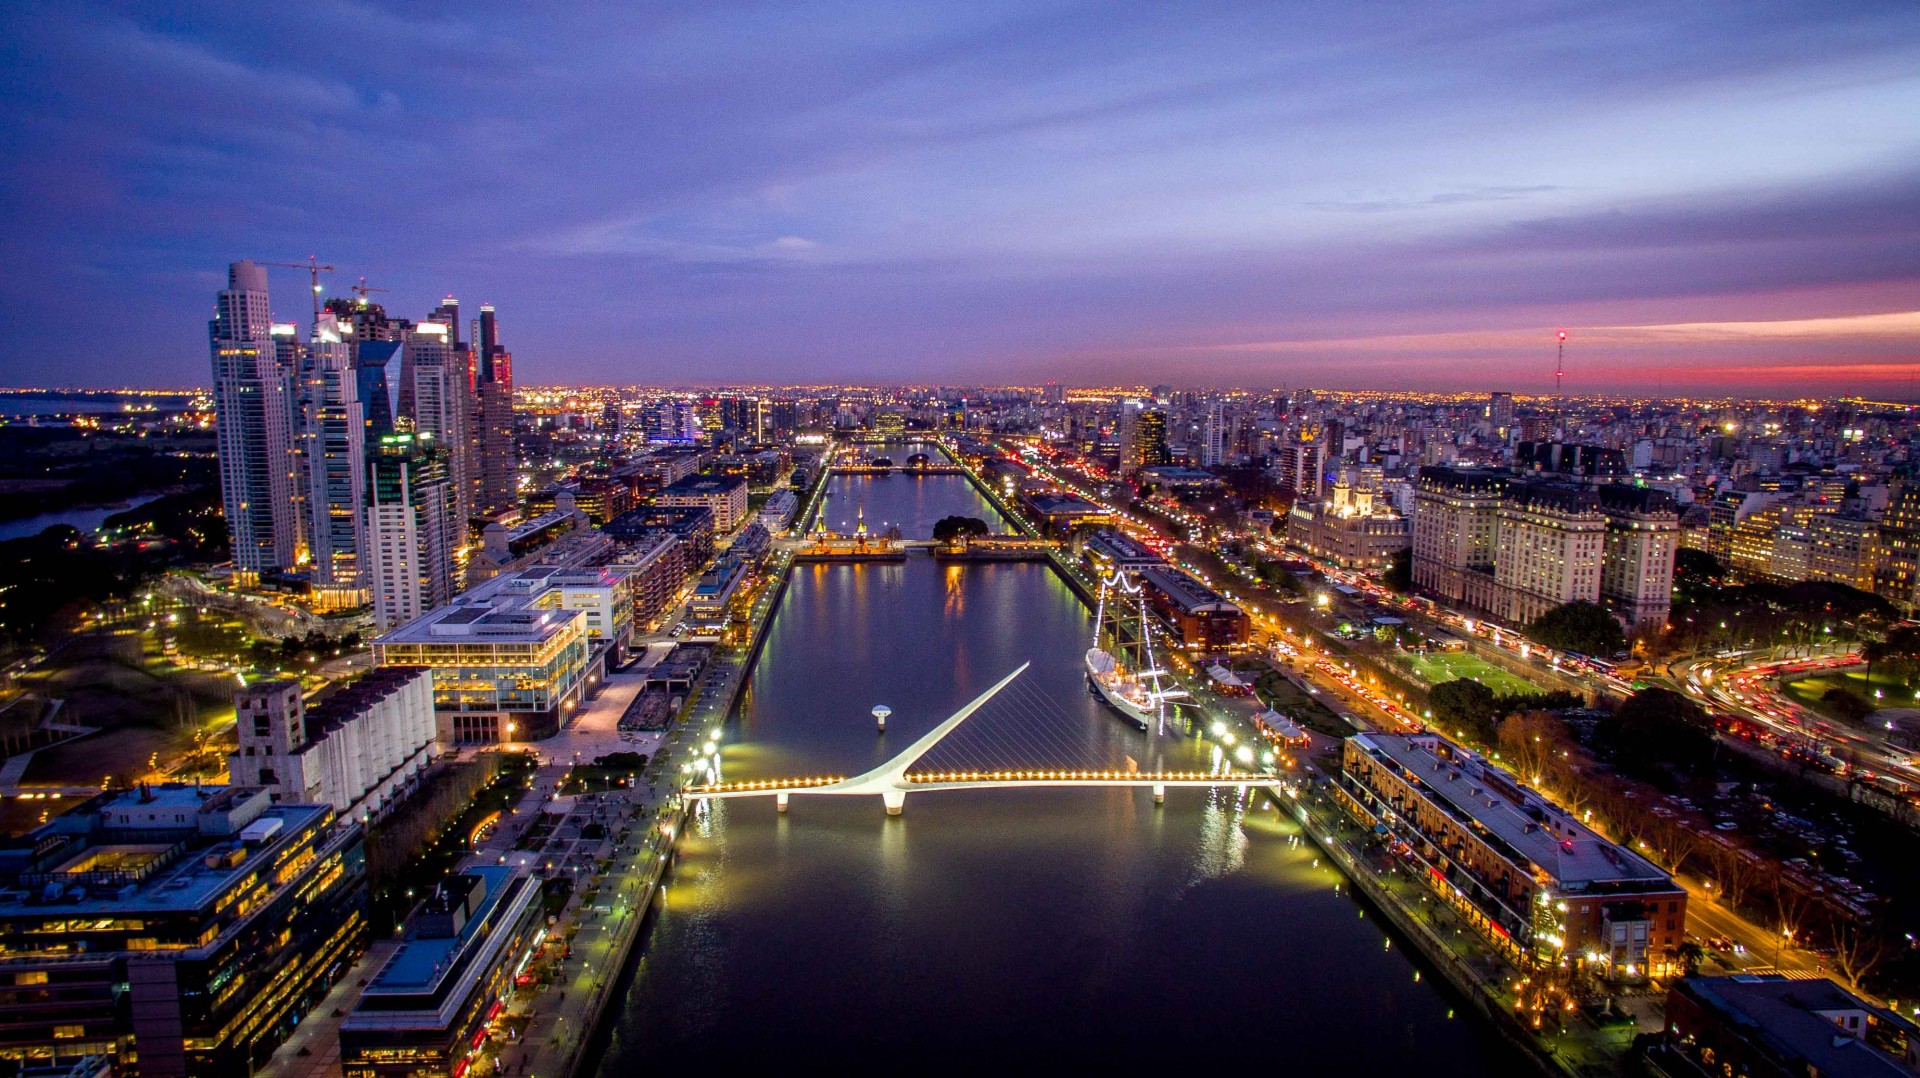 Buenos Aires: 2021's Smartest City in the World - We Build Value